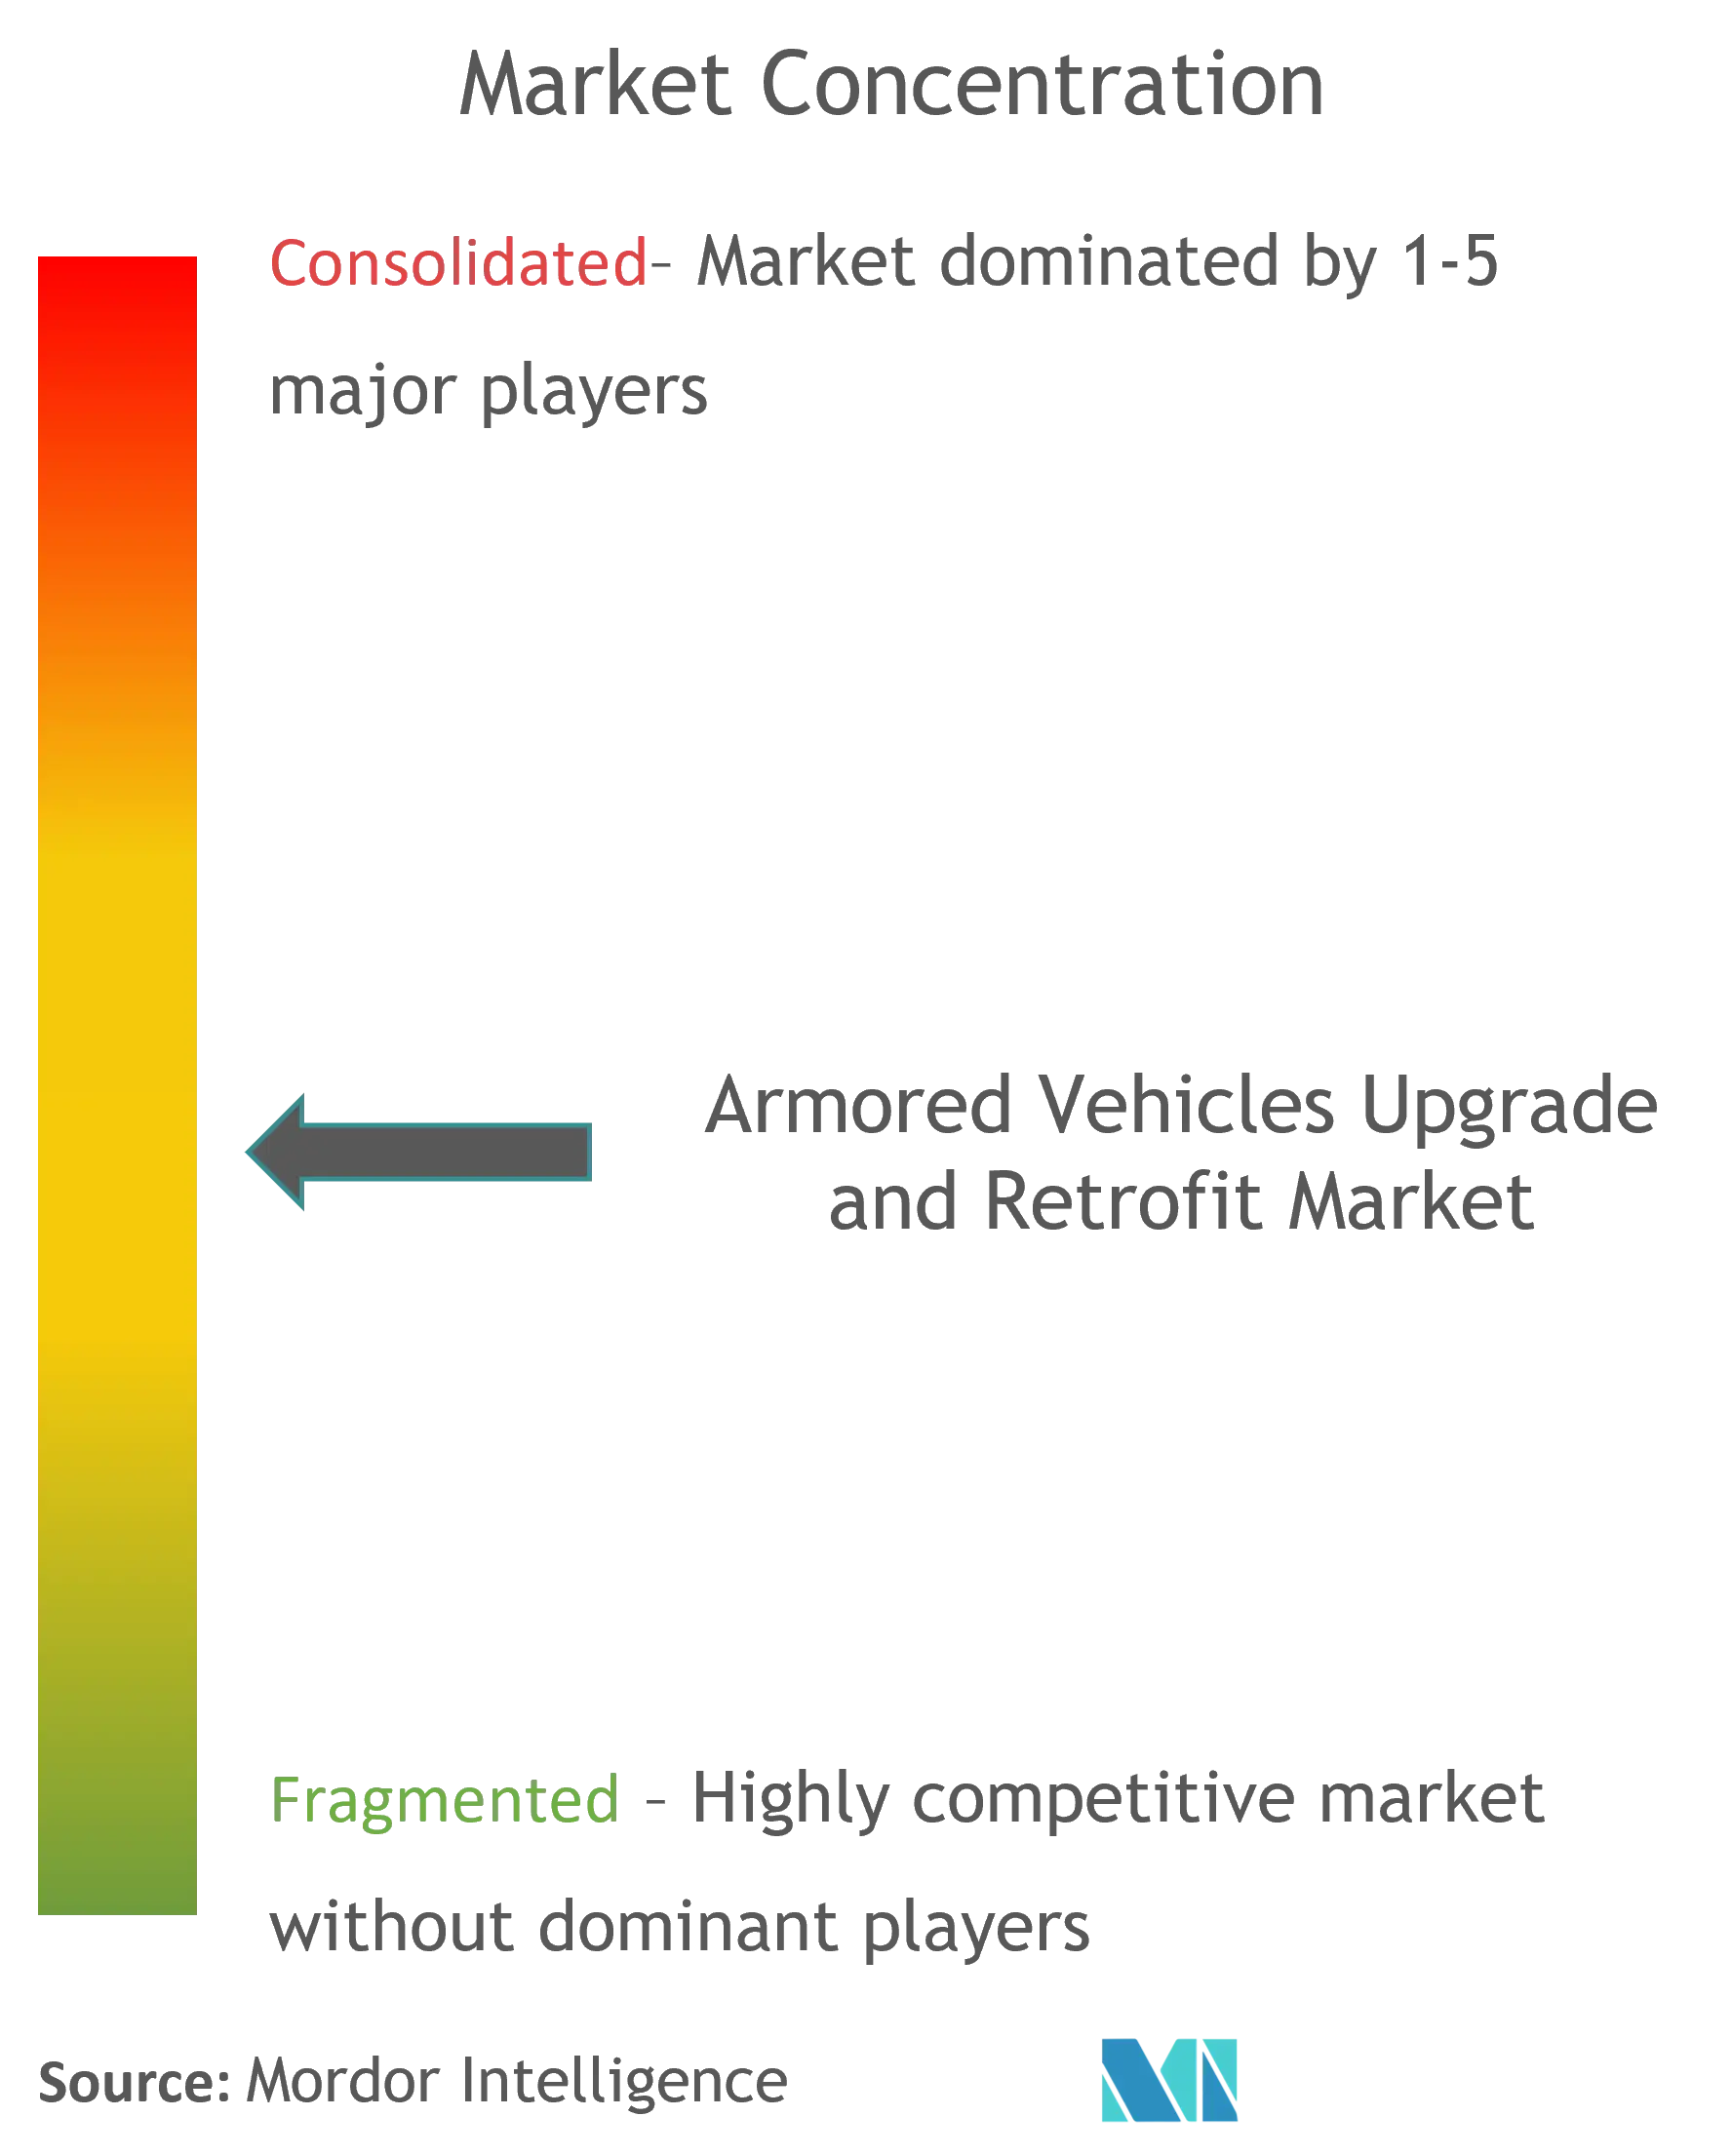 Armored Vehicle Upgrade And Retrofit Market Concentration